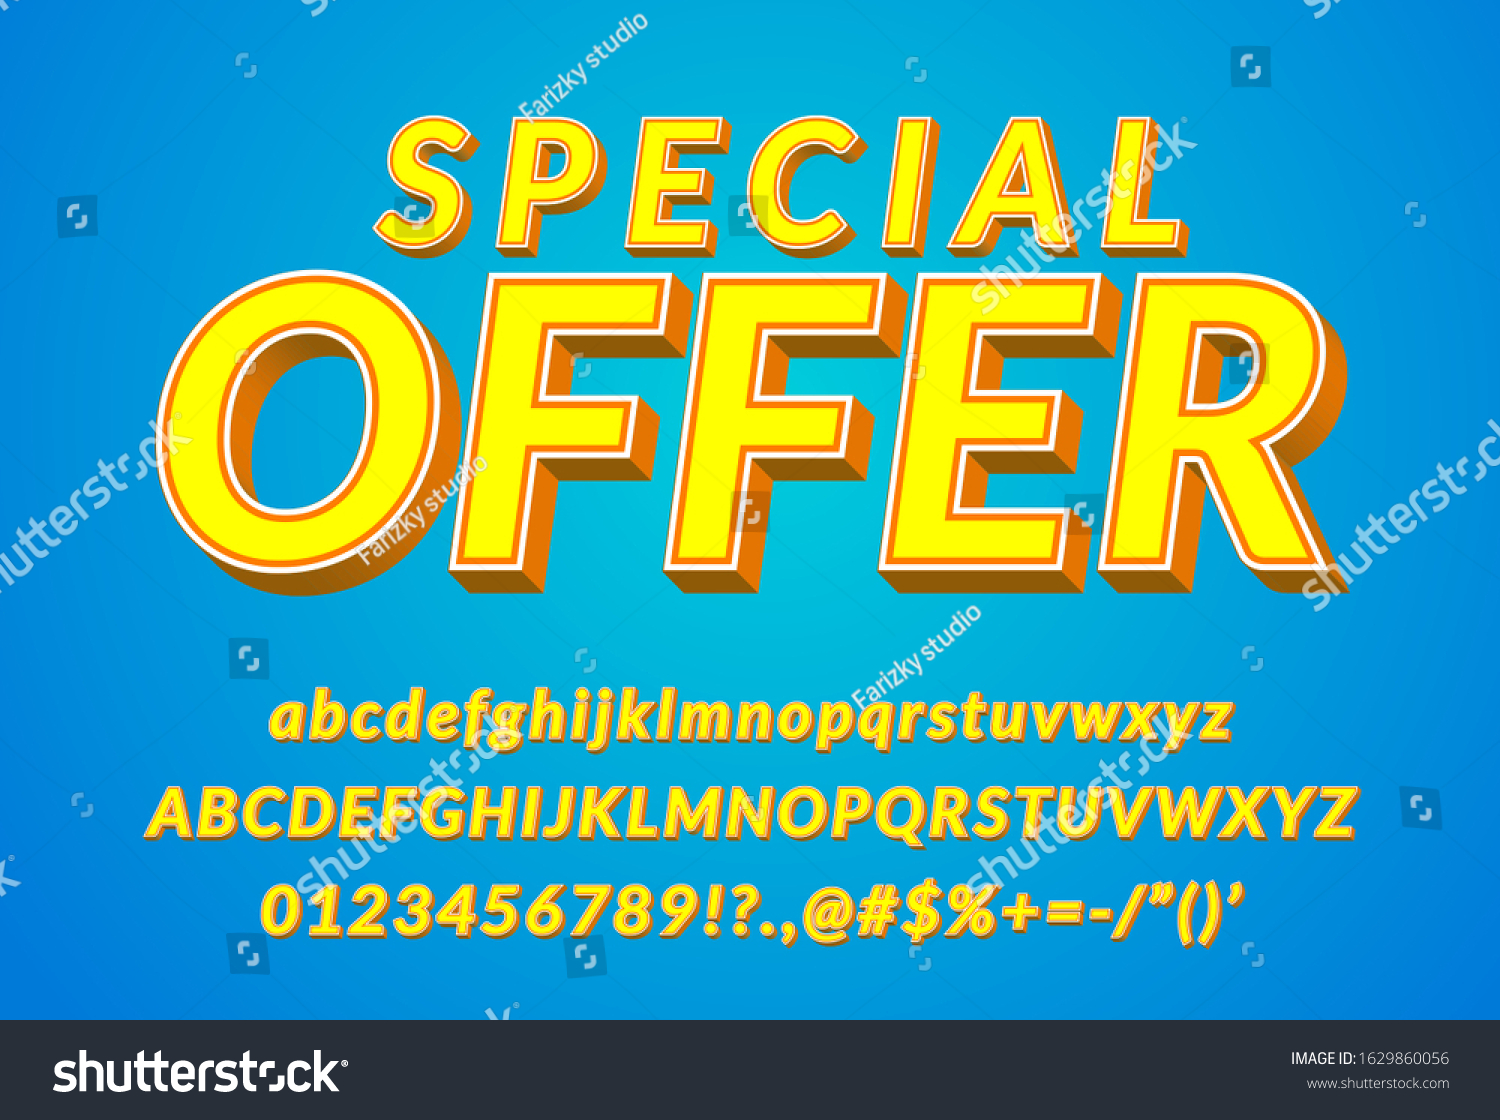 3d Alphabet Special Offer Word Template Stock Vector Royalty Free